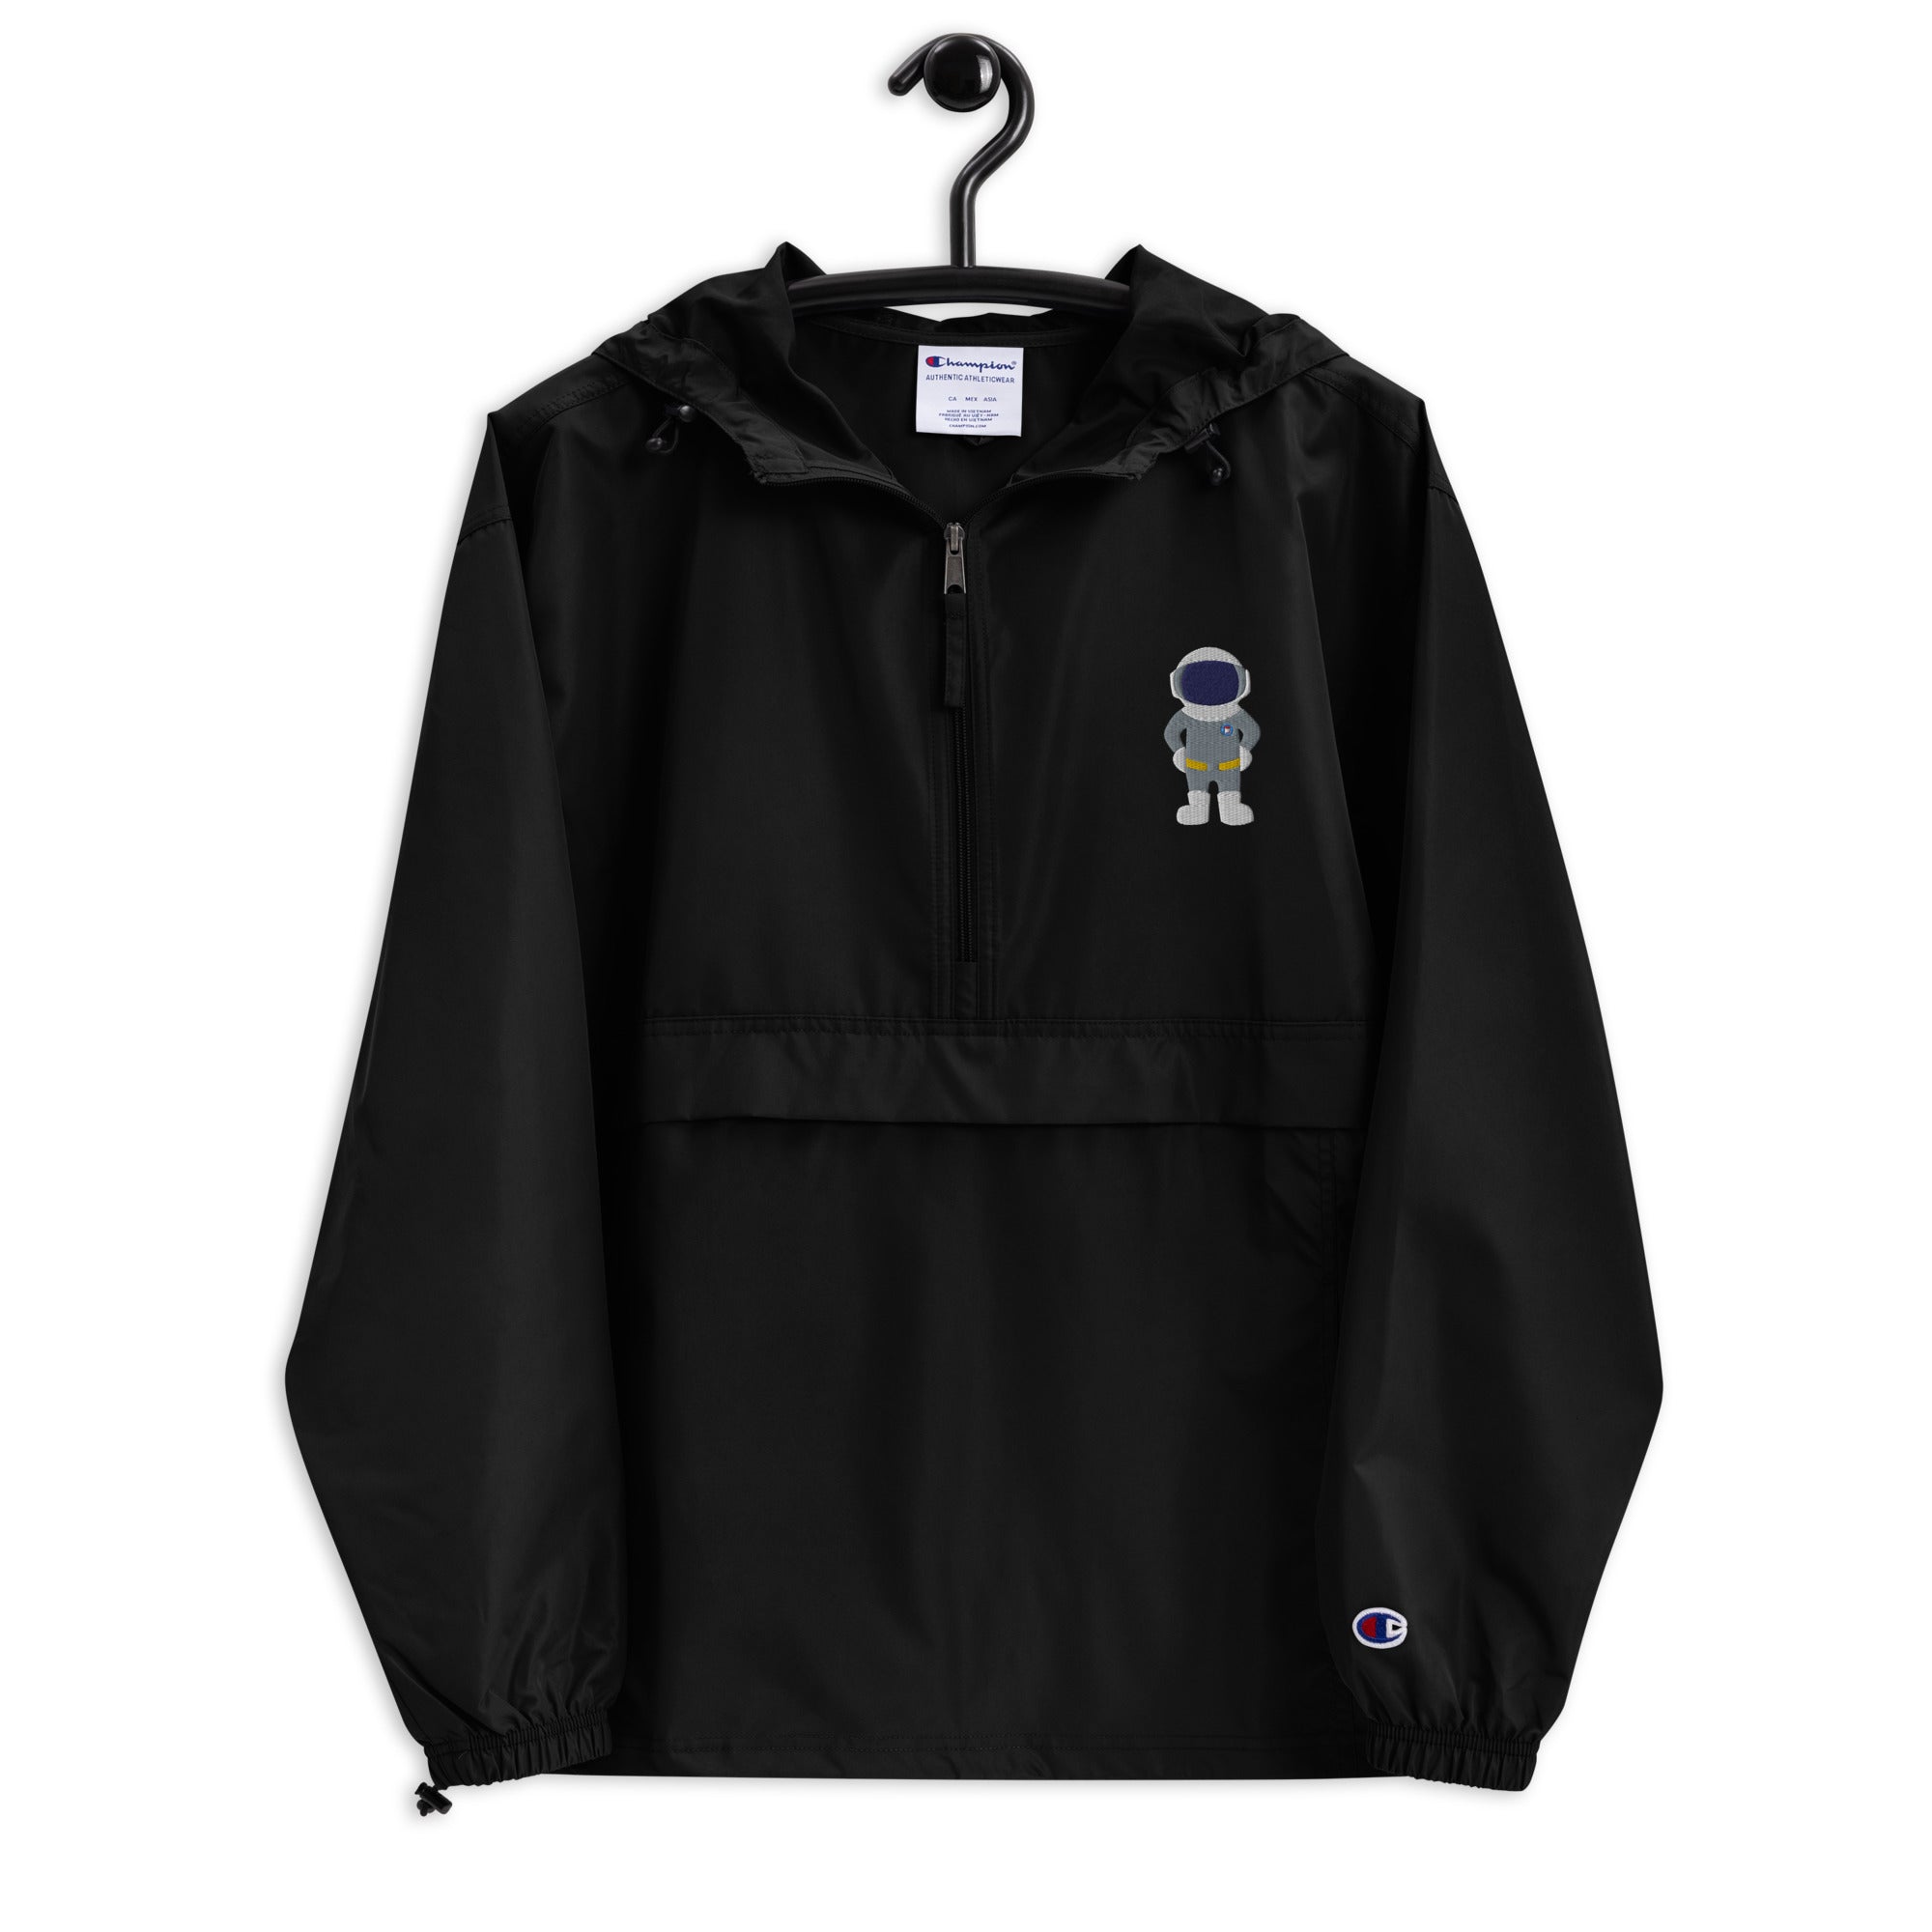 AstroNought x Champion Packable Jacket